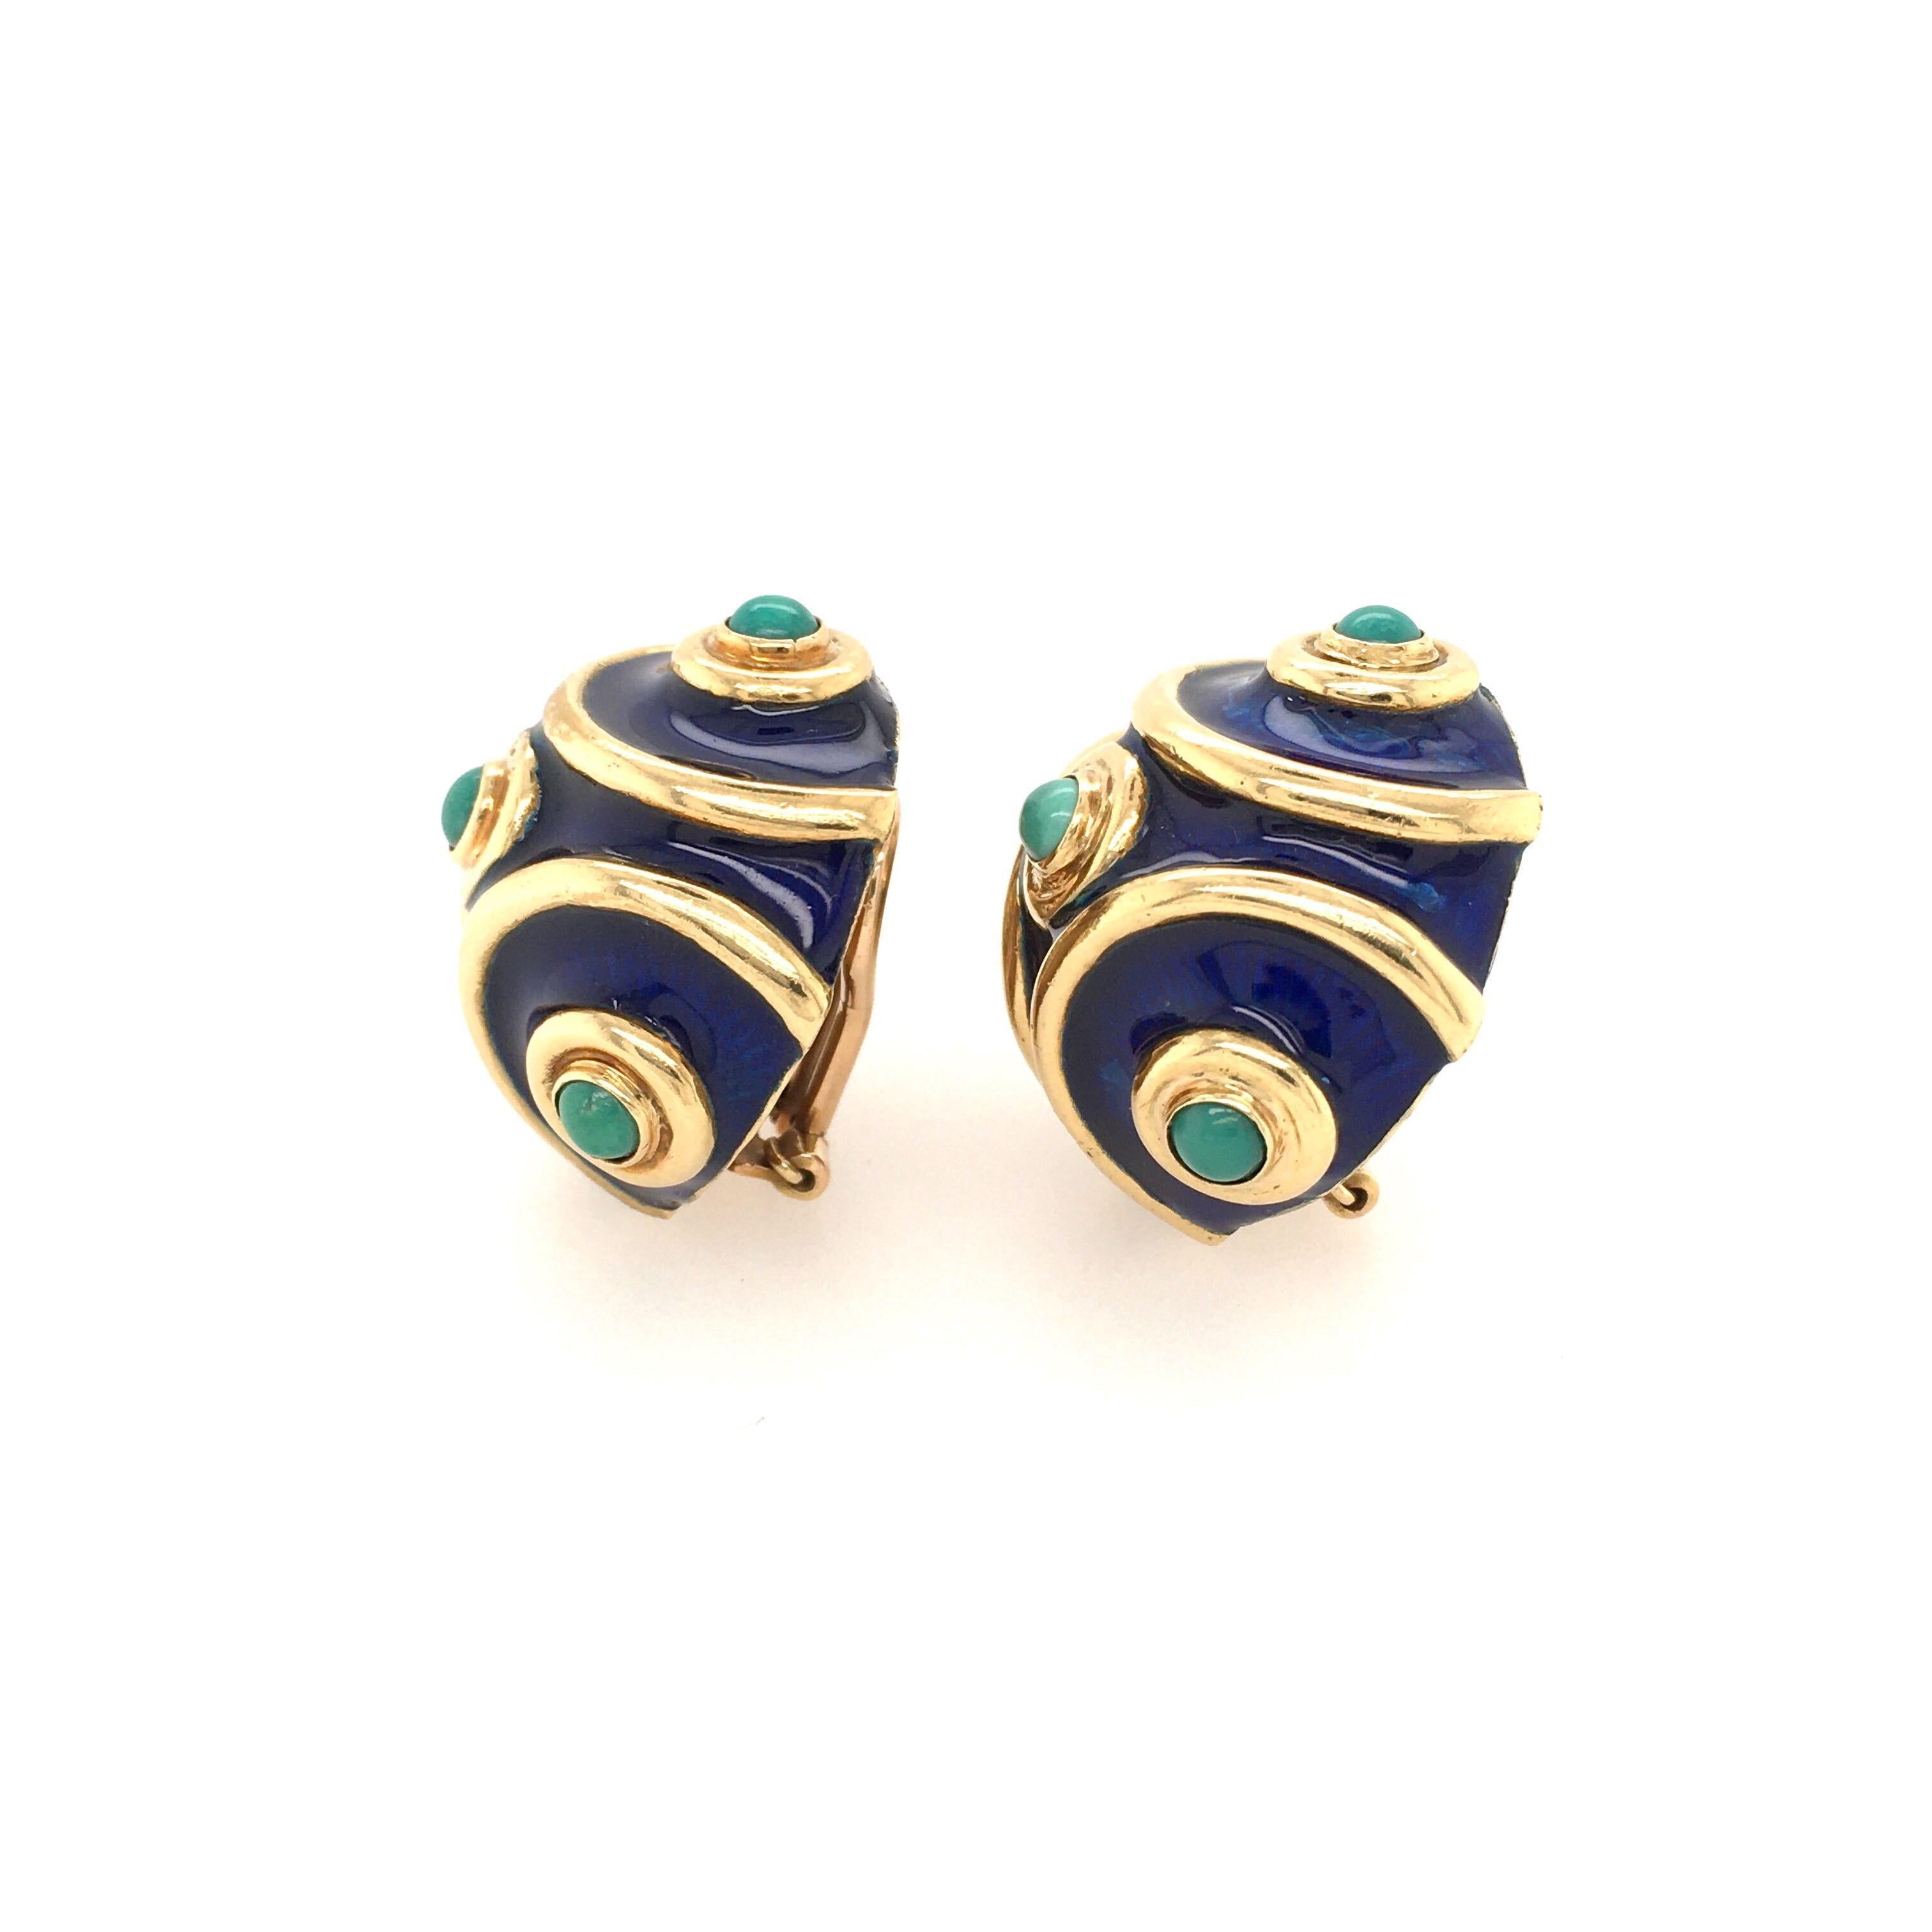 A pair of 18 karat yellow gold, enamel and turquoise earrings, Tiffany & Co. Italy. Circa 1980. Designed as a royal blue paillonné enamel dome, decorated with polished gold lines and cabochon turquoise. Diameter is approximately 7/8 inches, gross